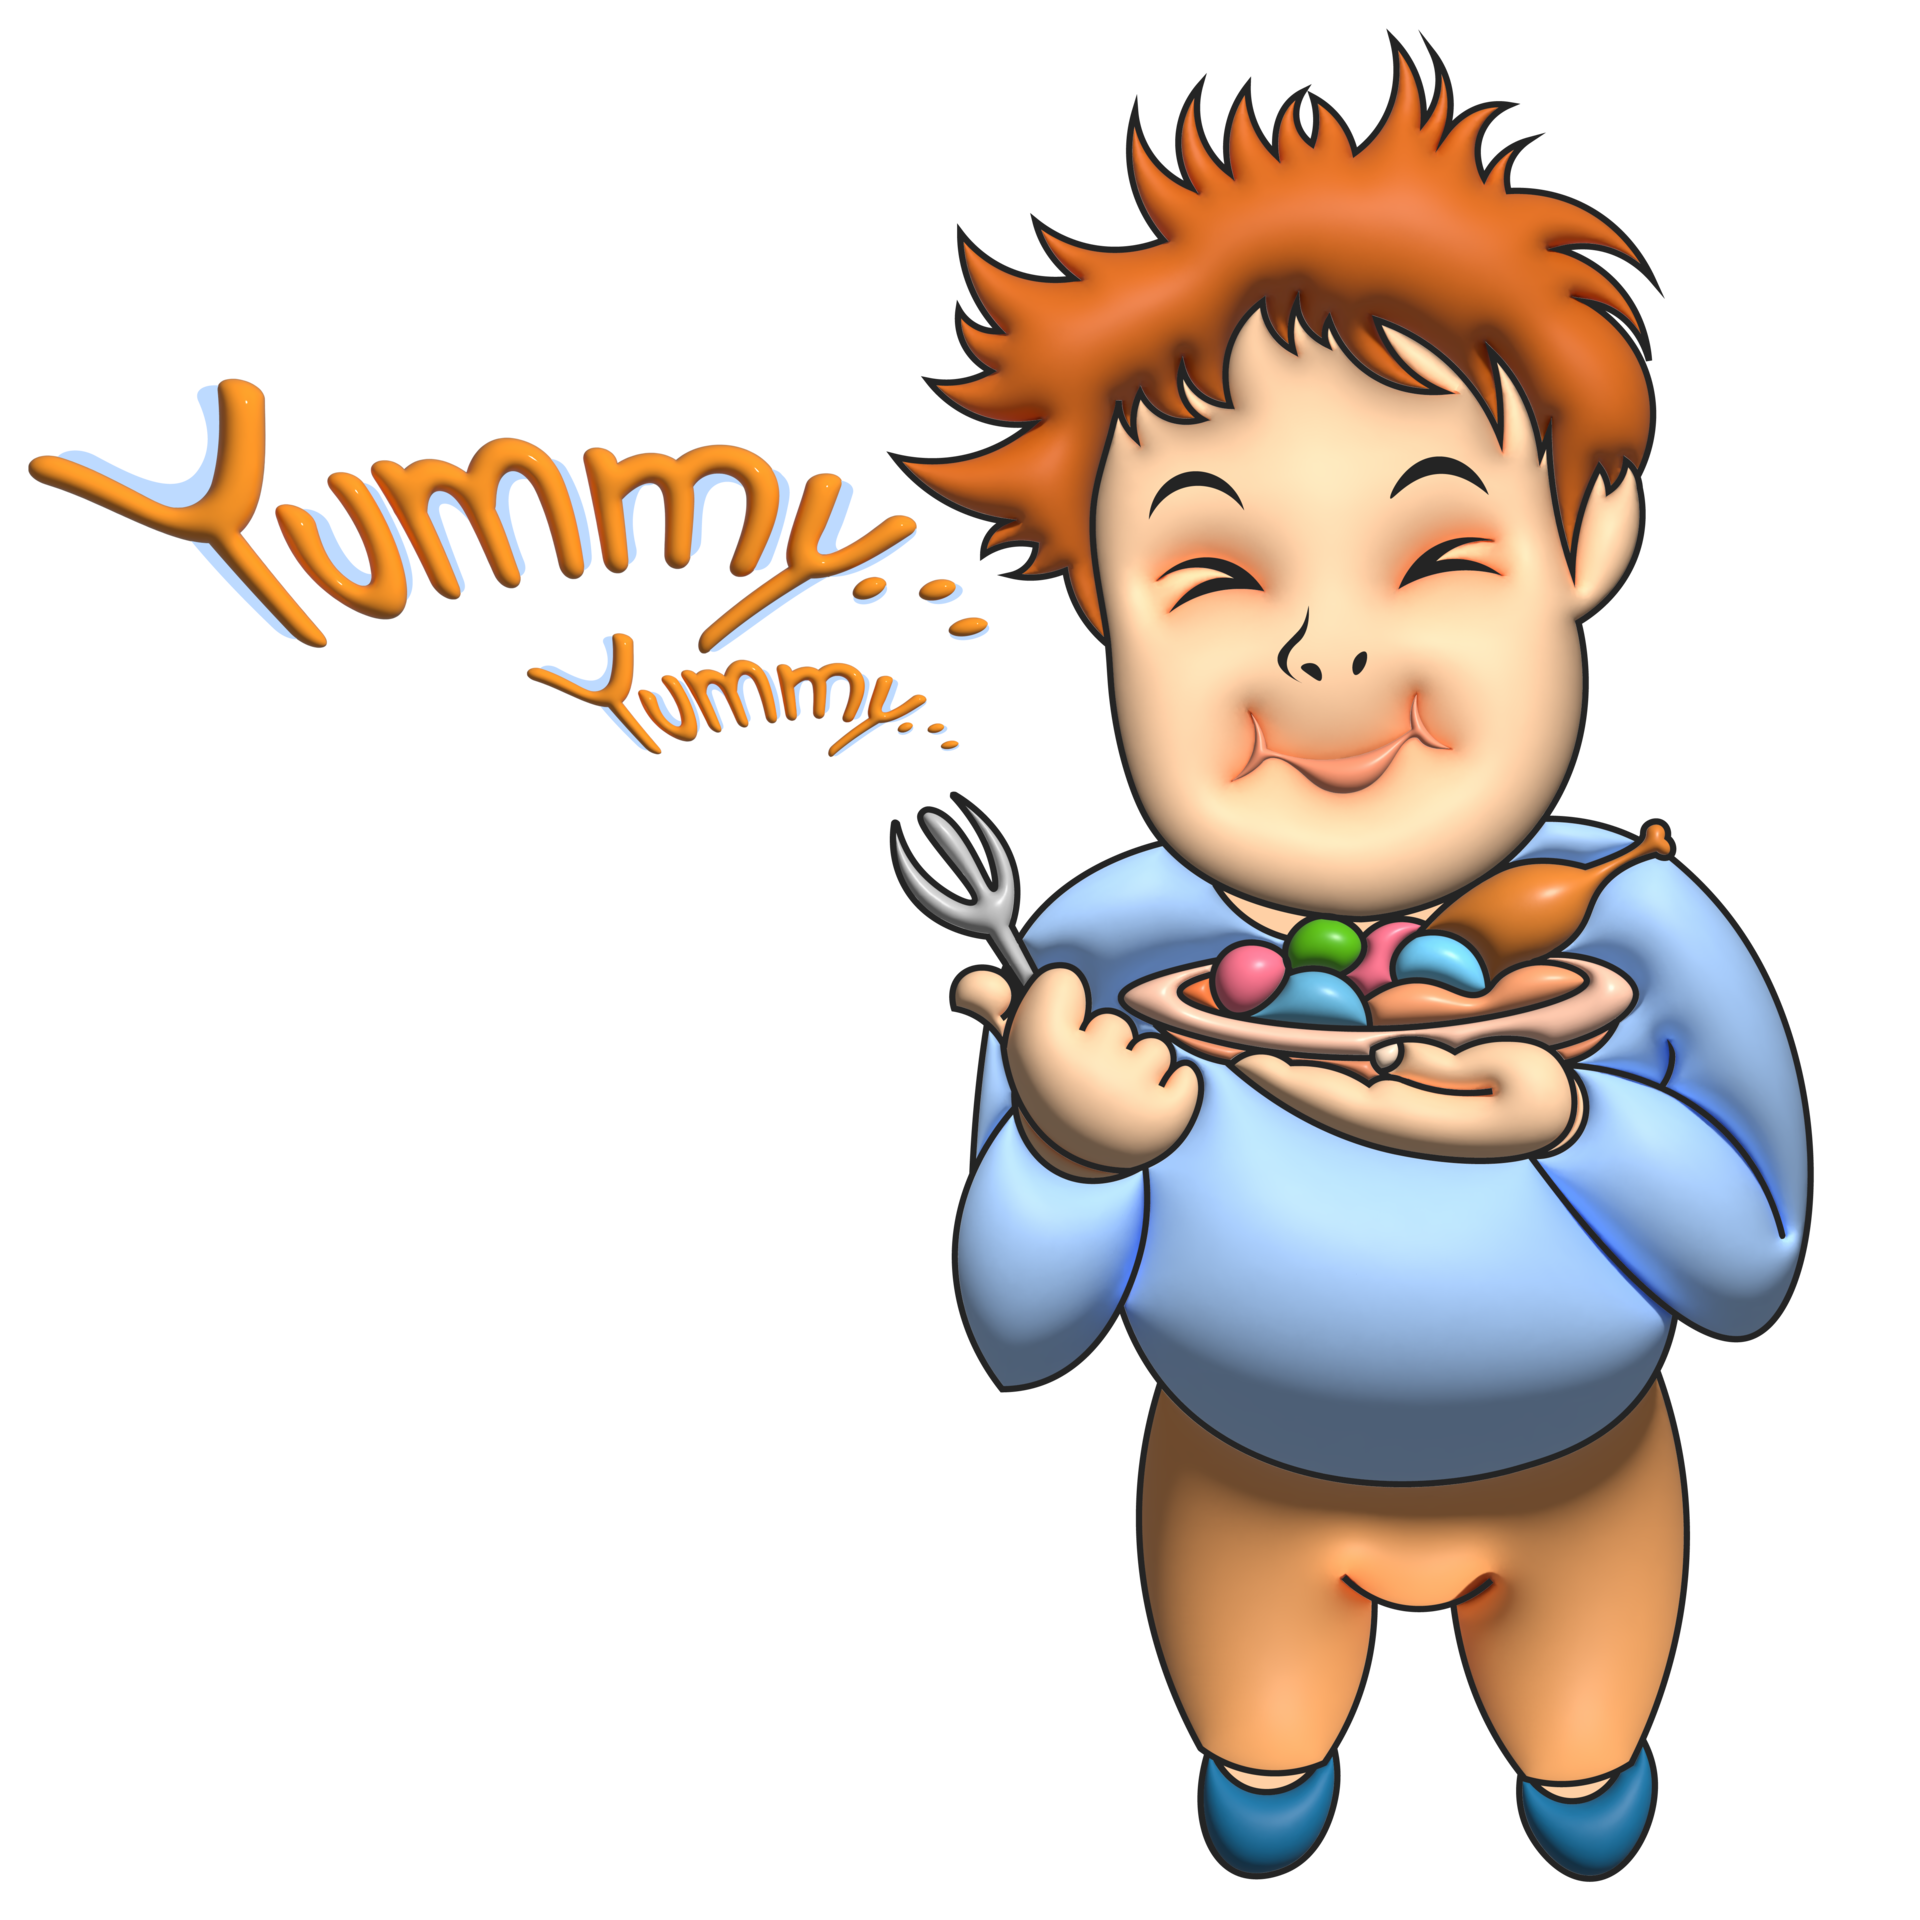 https://static.vecteezy.com/system/resources/previews/026/803/745/original/yummy-boy-cartoon-eating-png.png